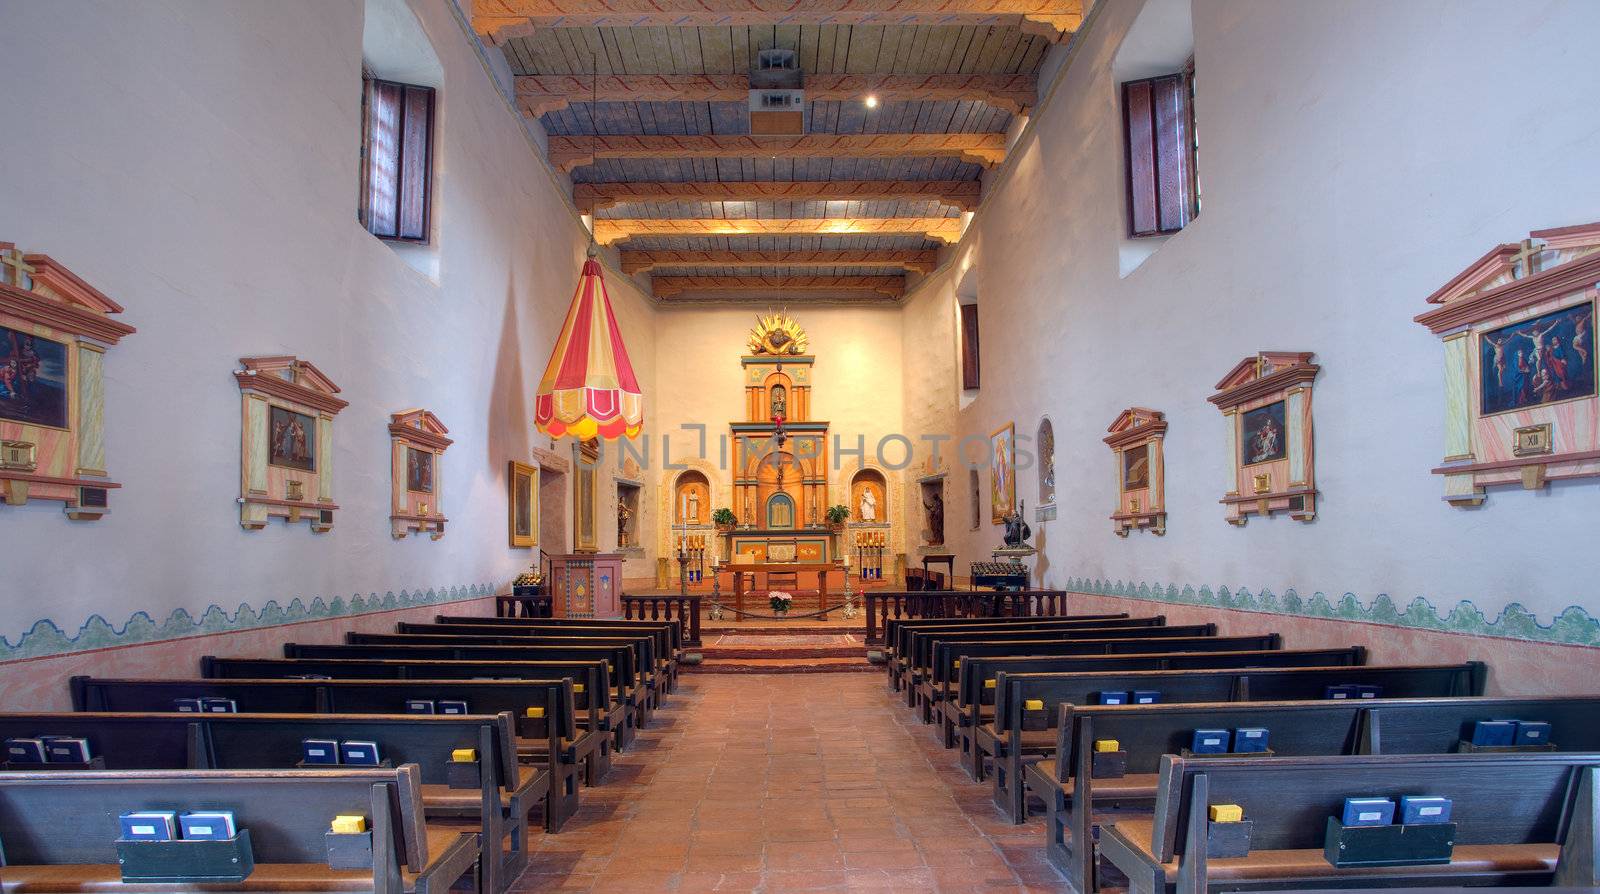 Interior of San Diego Mission by steheap